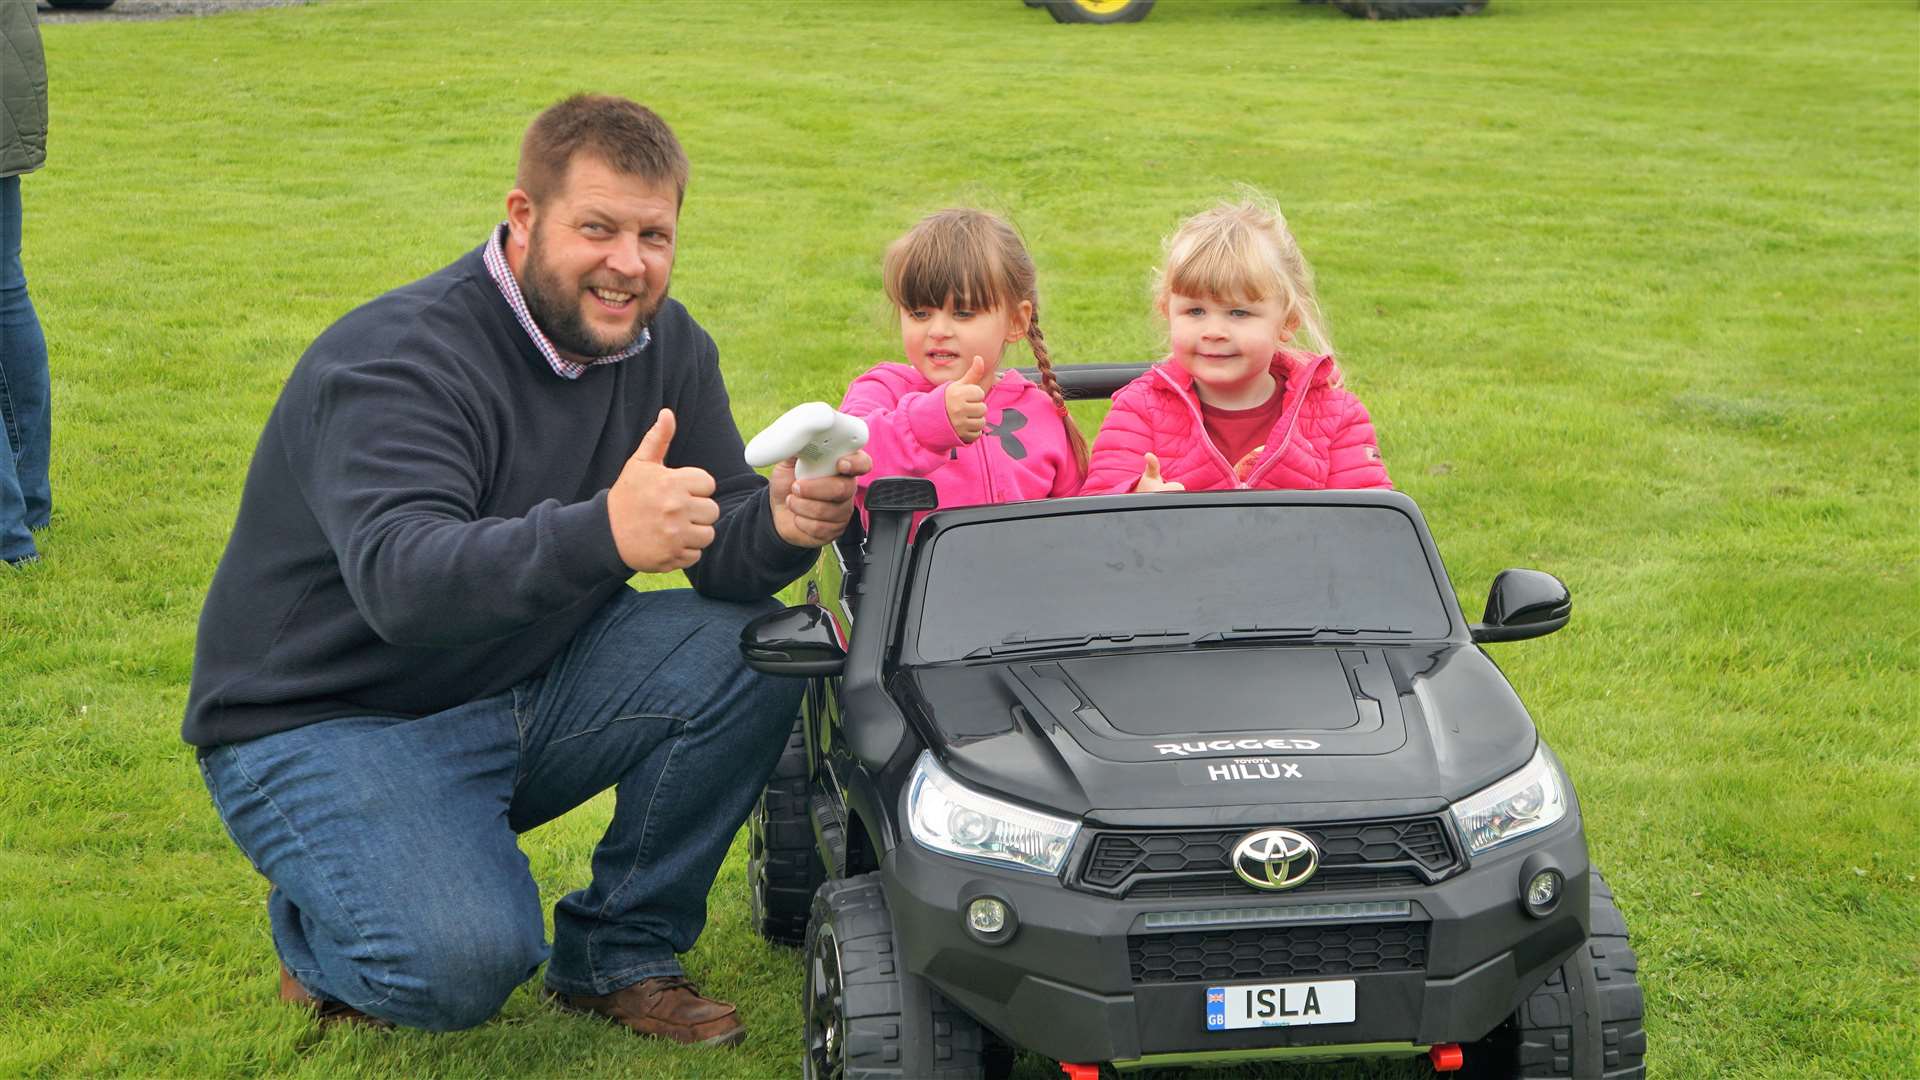 Vice chair of the vintage vehicle club, James Green, with his daughter Isla and her friend who is also called Isla. Picture: DGS